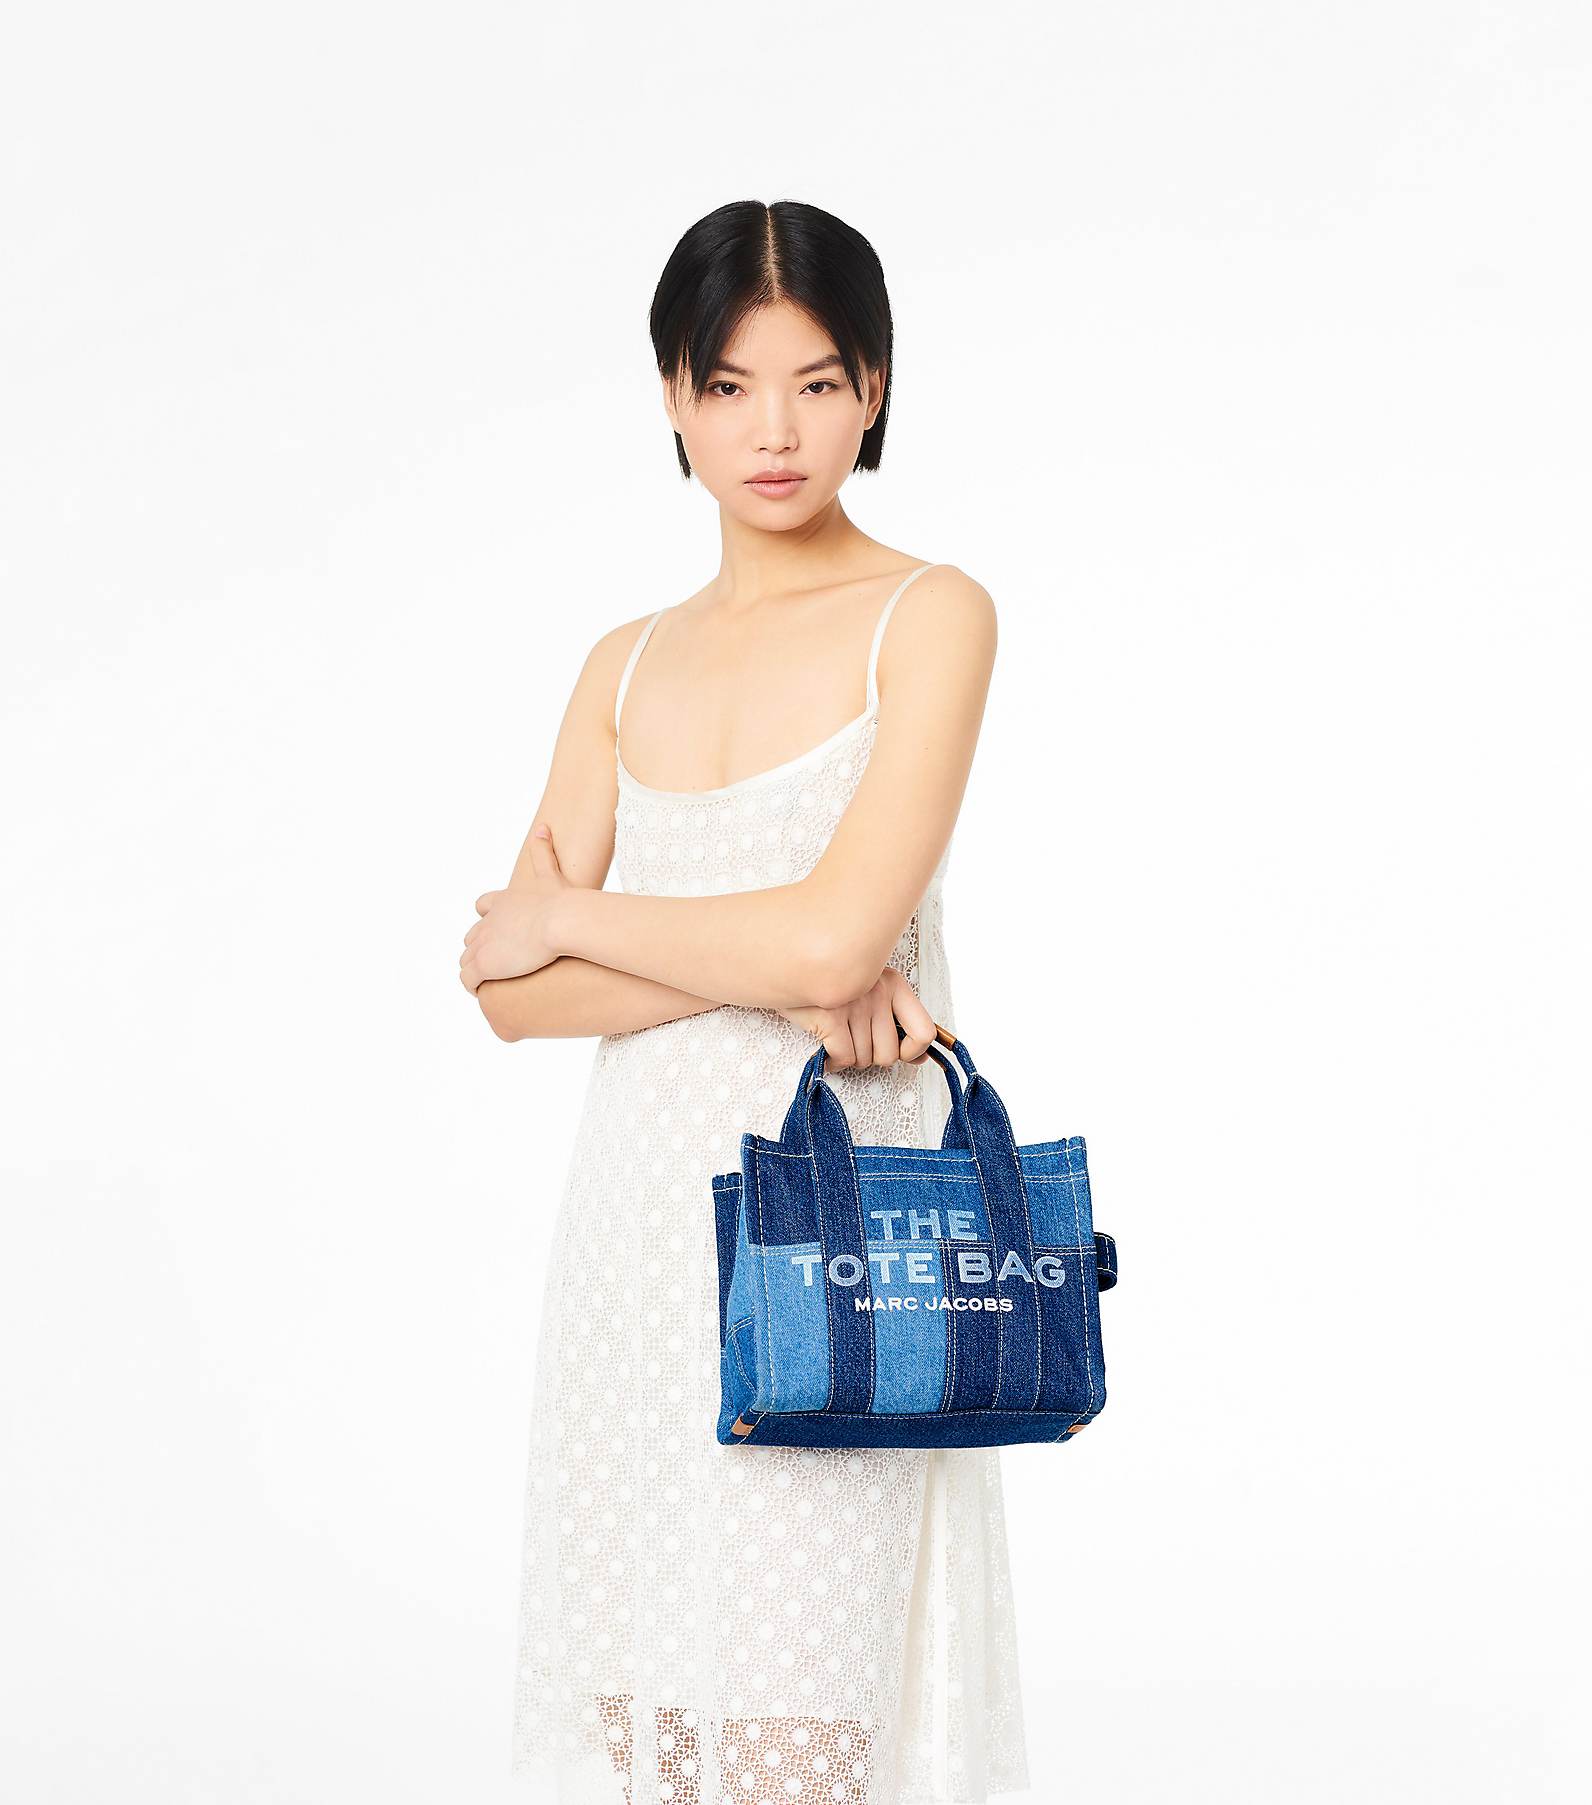 Add A Detachable Shoulder Strap To Any Open-Top Tote - Lazy Girl